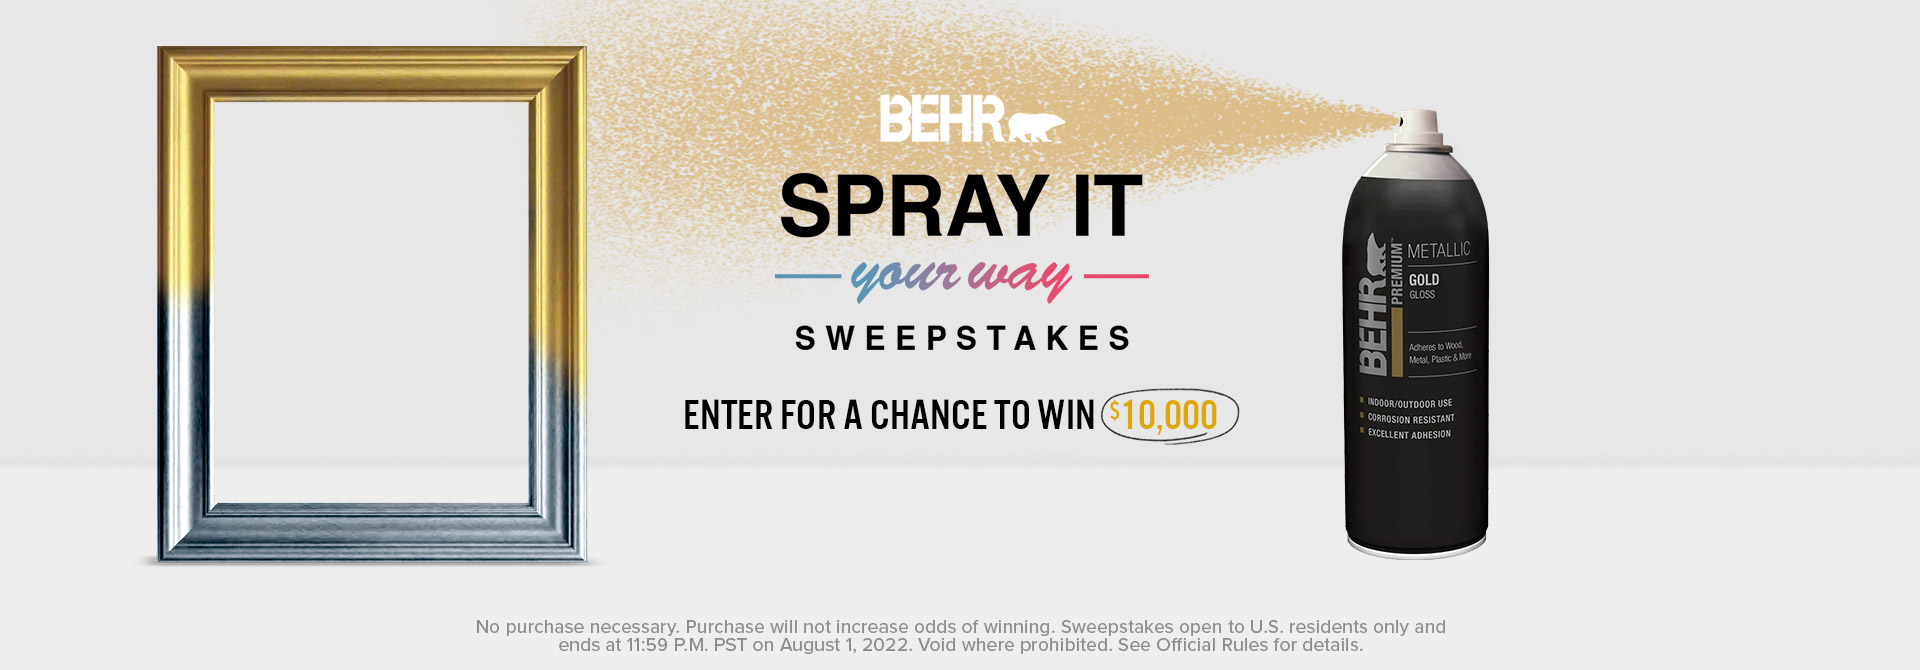 Spray paint can spray painting a picture frame and the words Spray It Your Way Sweepstakes Enter For a Chance to Win $10,000 in foreground